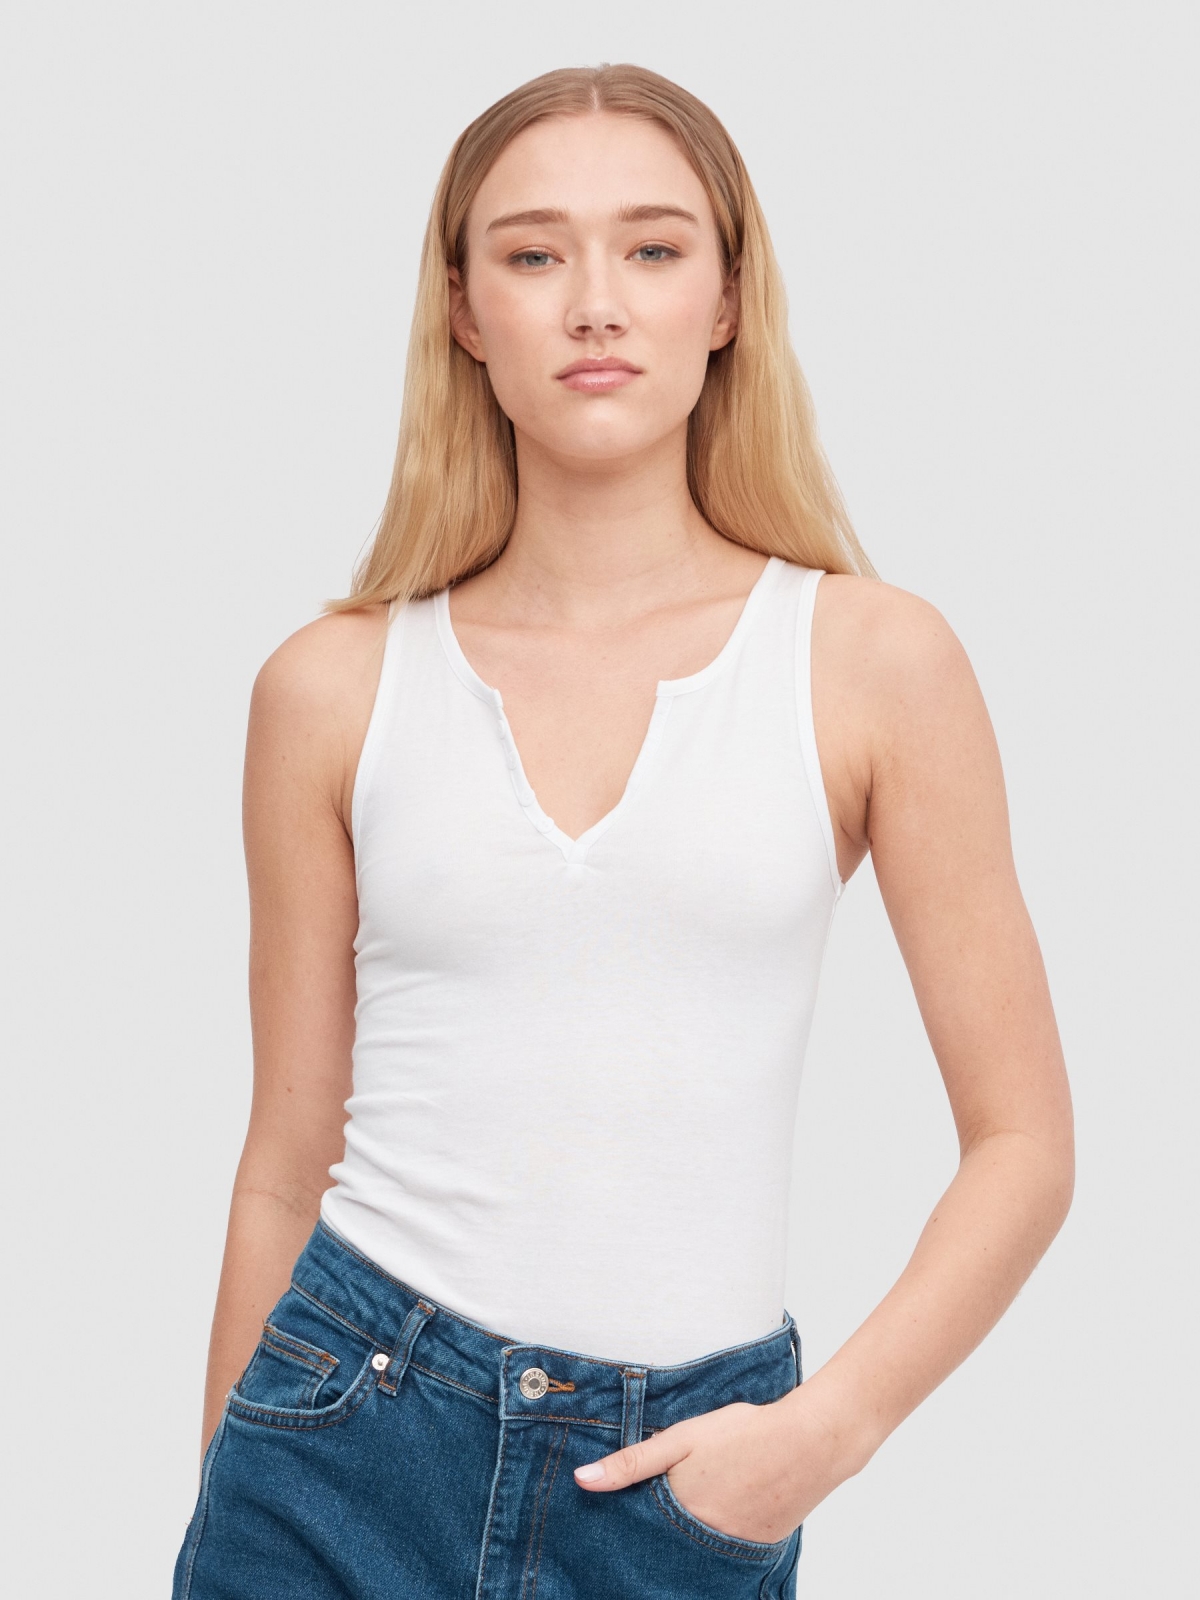 V-neck t-shirt with buttons white middle front view